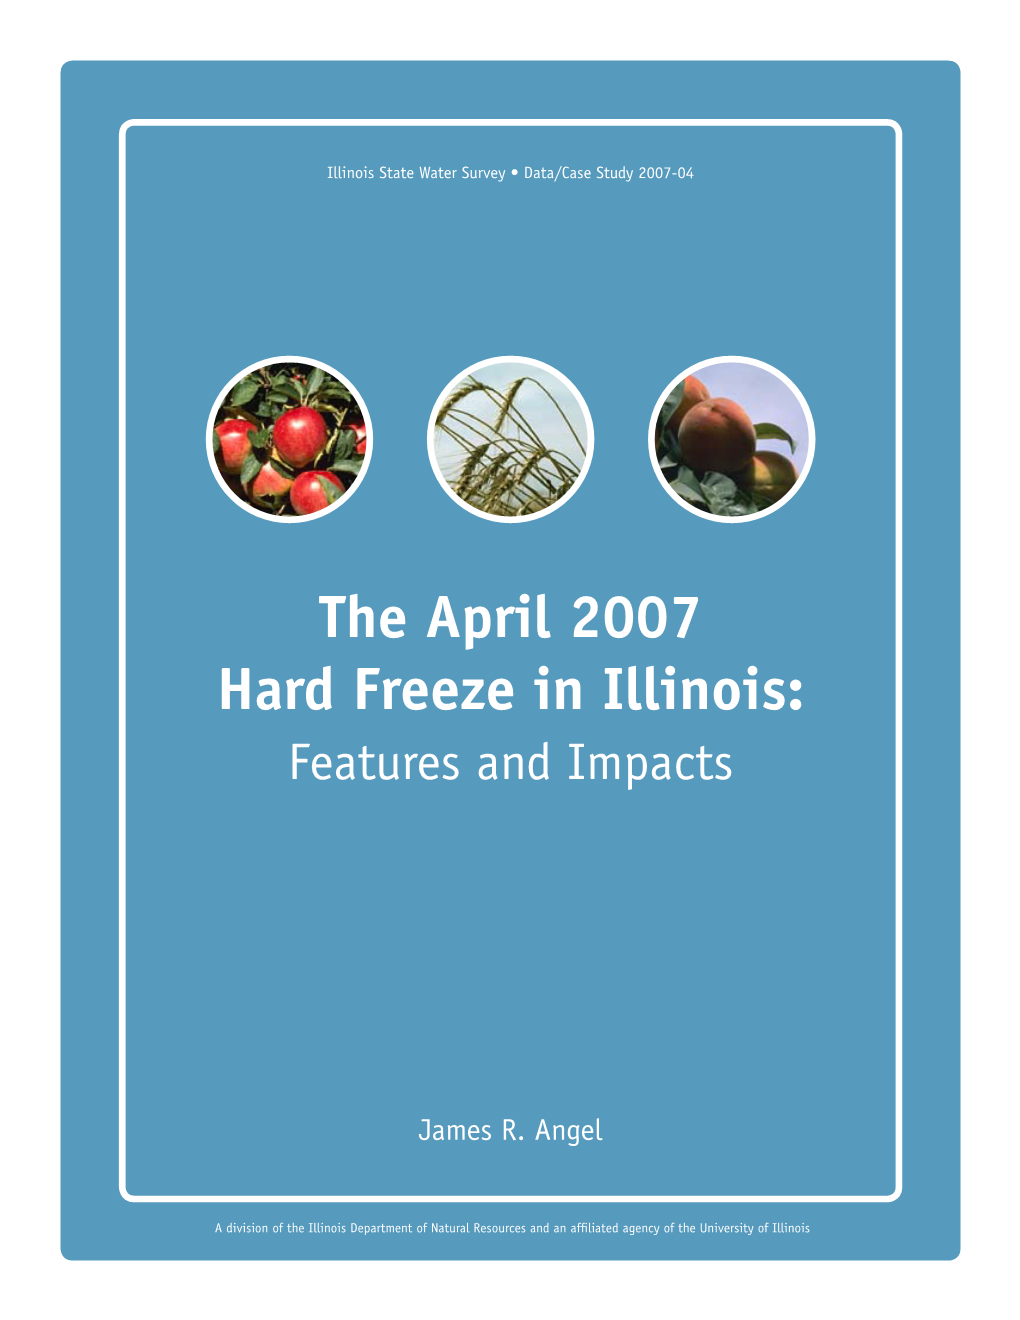 The April 2007 Hard Freeze in Illinois: Features and Impacts